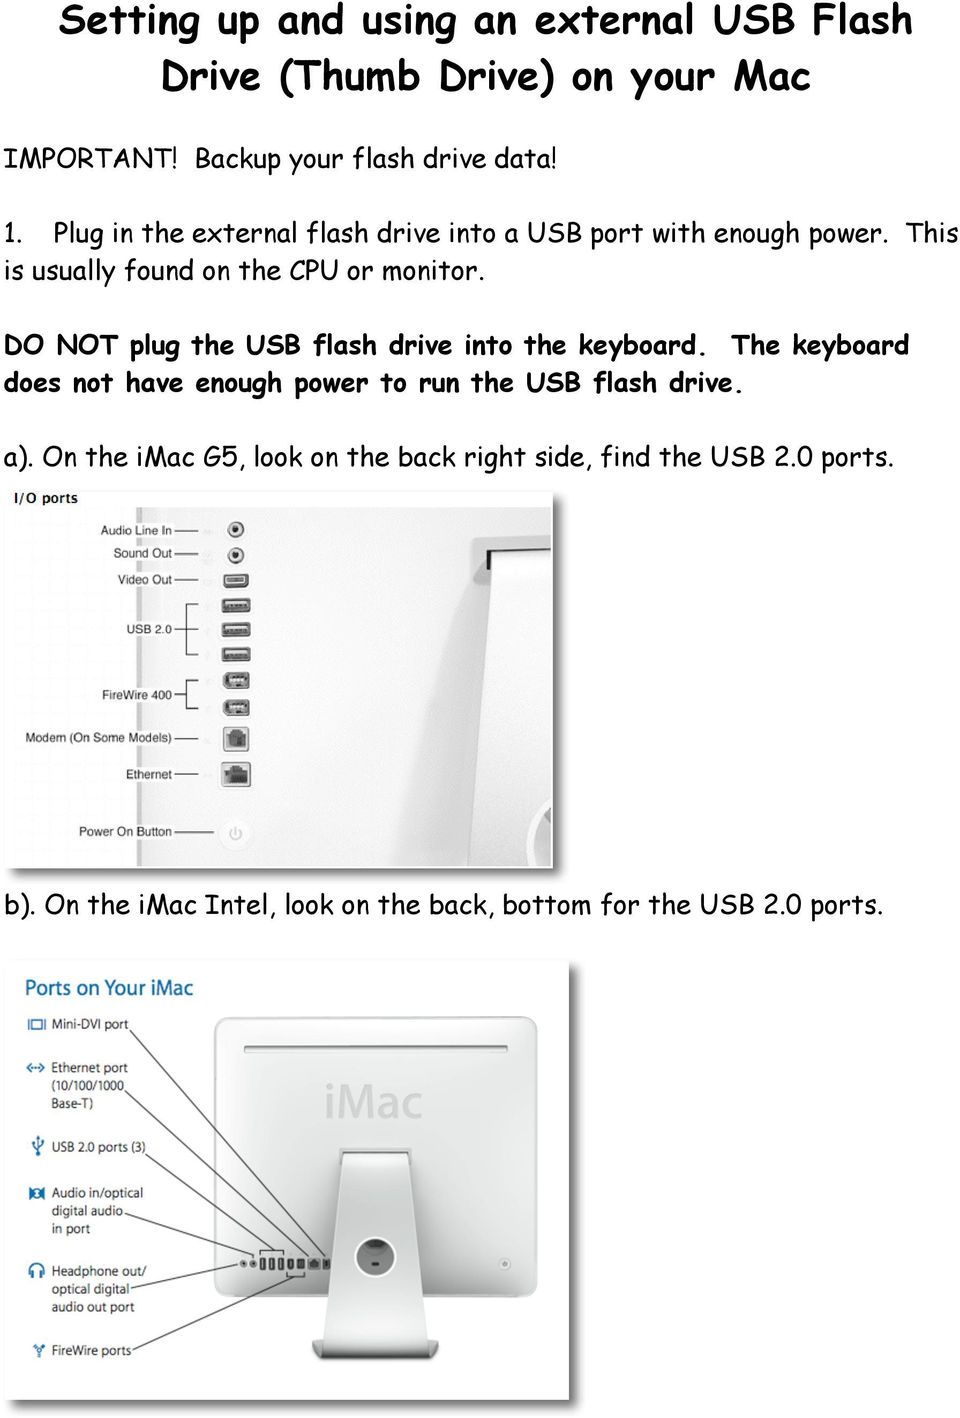 DO NOT plug the USB flash drive into the keyboard. The keyboard does not have enough power to run the USB flash drive. a).